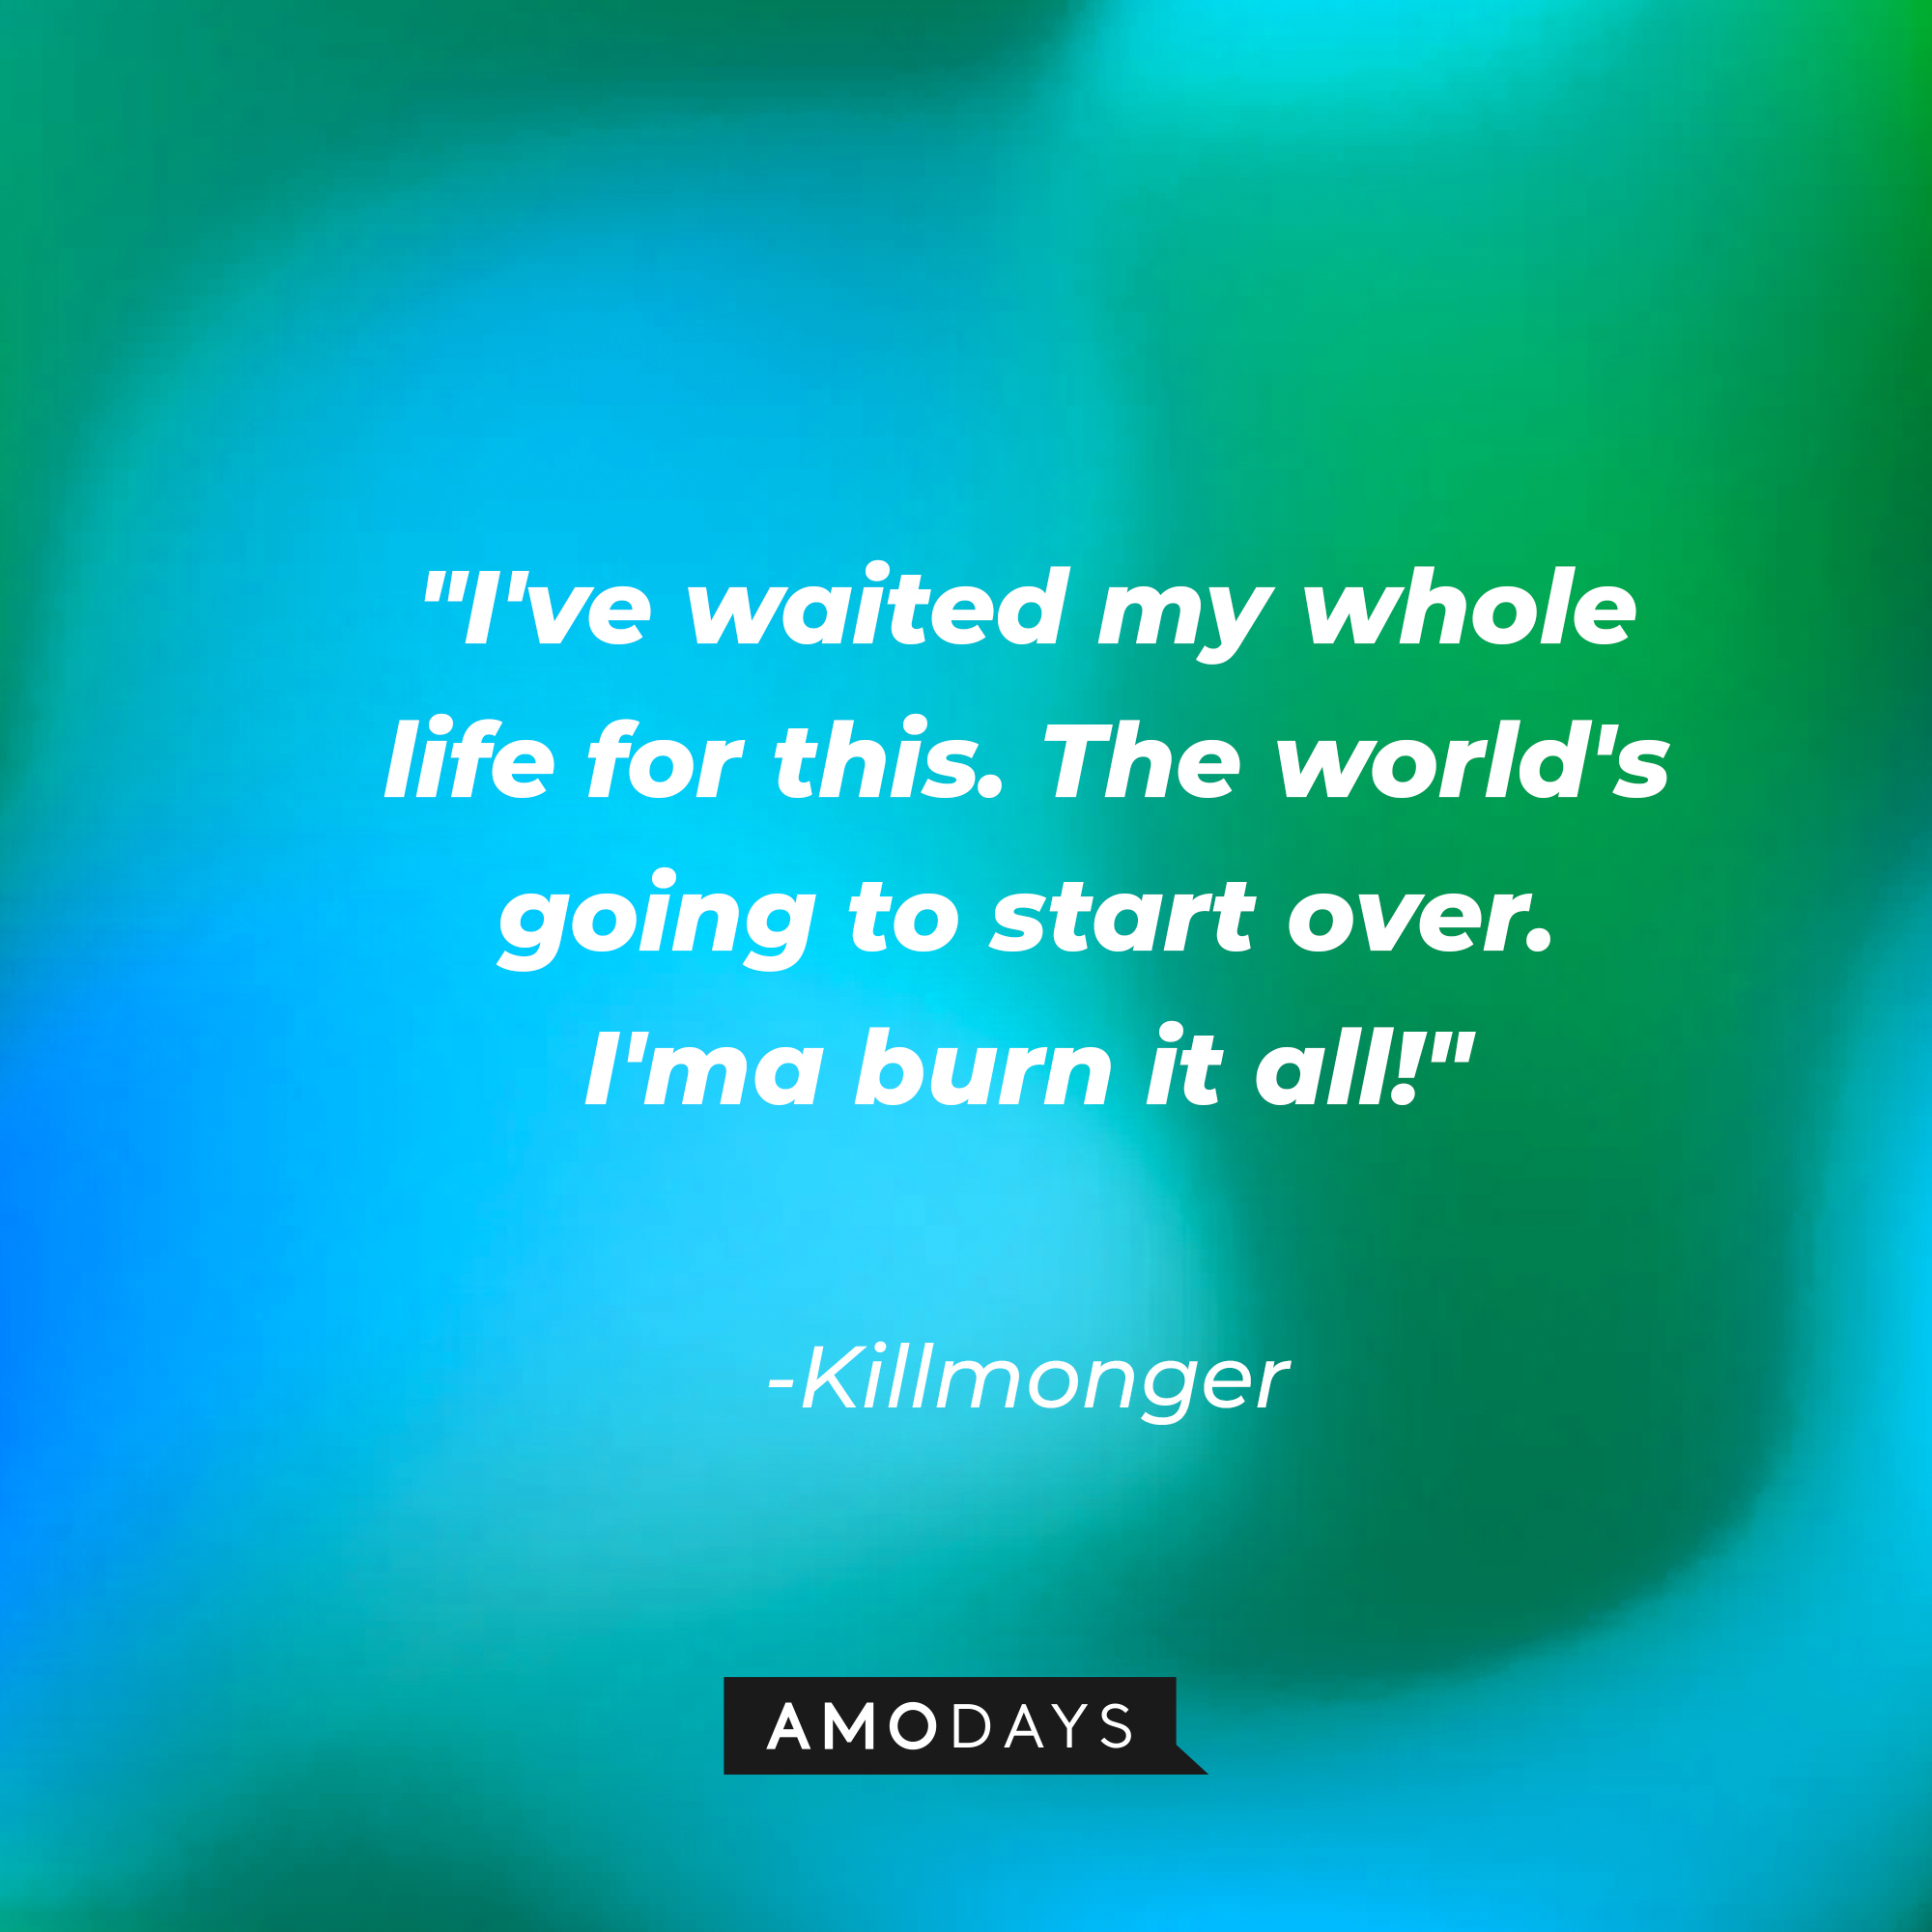 Killmonger's quote: "I've waited my whole life for this. The world's going to start over. I'ma burn it all!" | Source: AmoDays